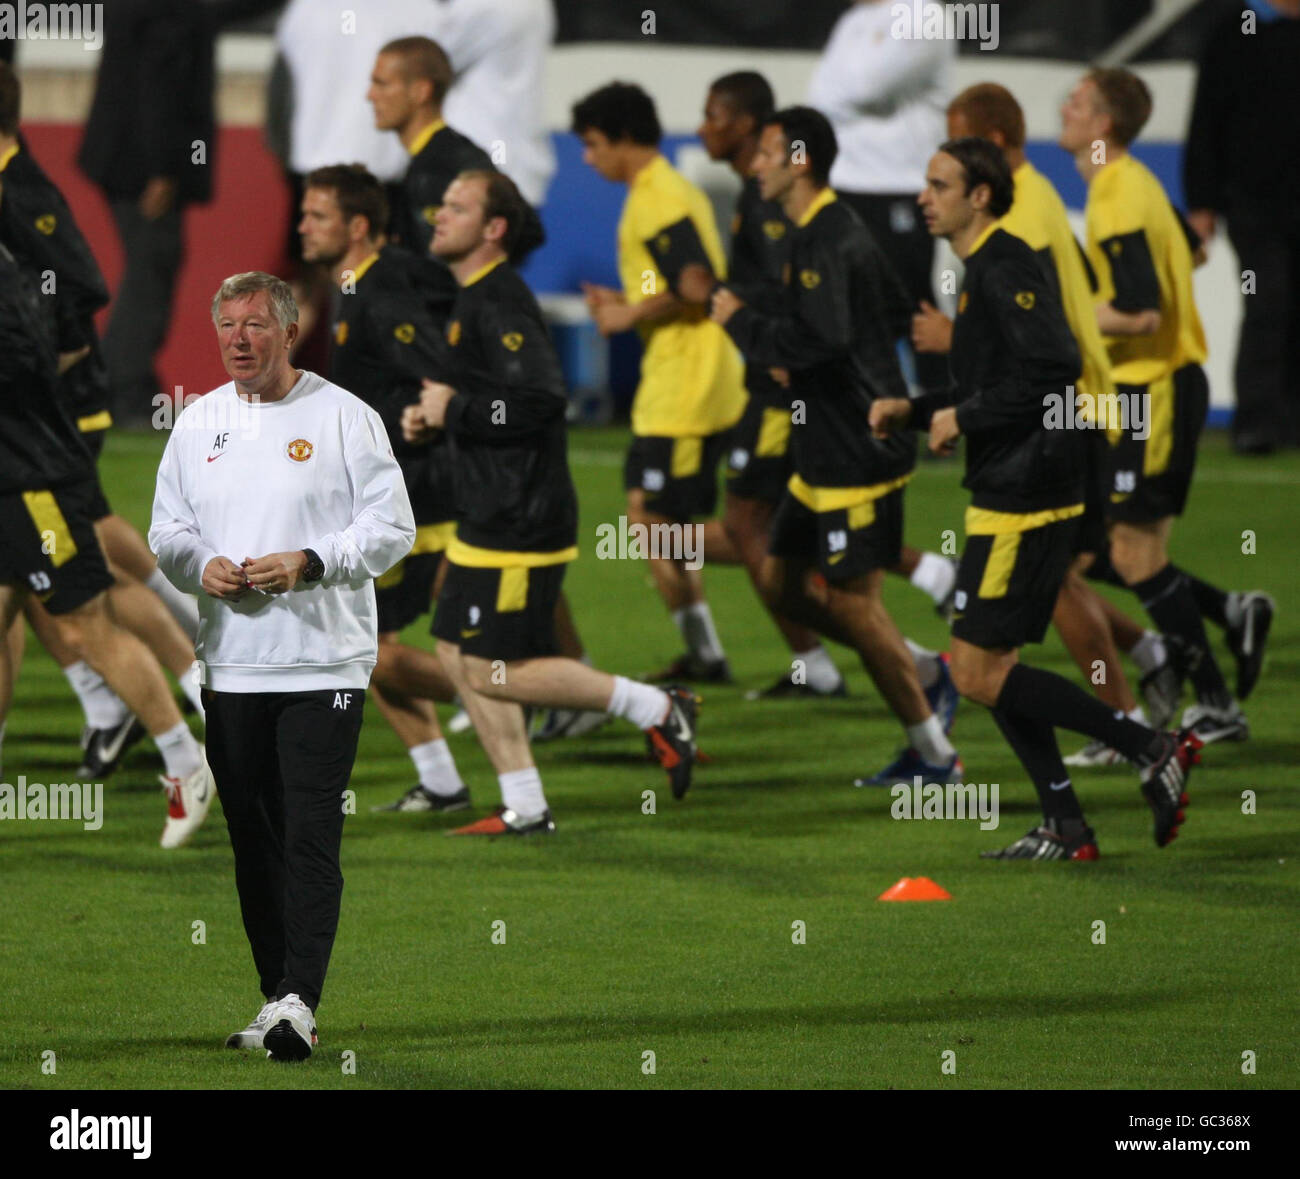 Manchester United's Manager Sir Alex Ferguson walks around pitch as players jog past him during the training session at the Inonu Stadium, Istanbul, Turkey. Stock Photo